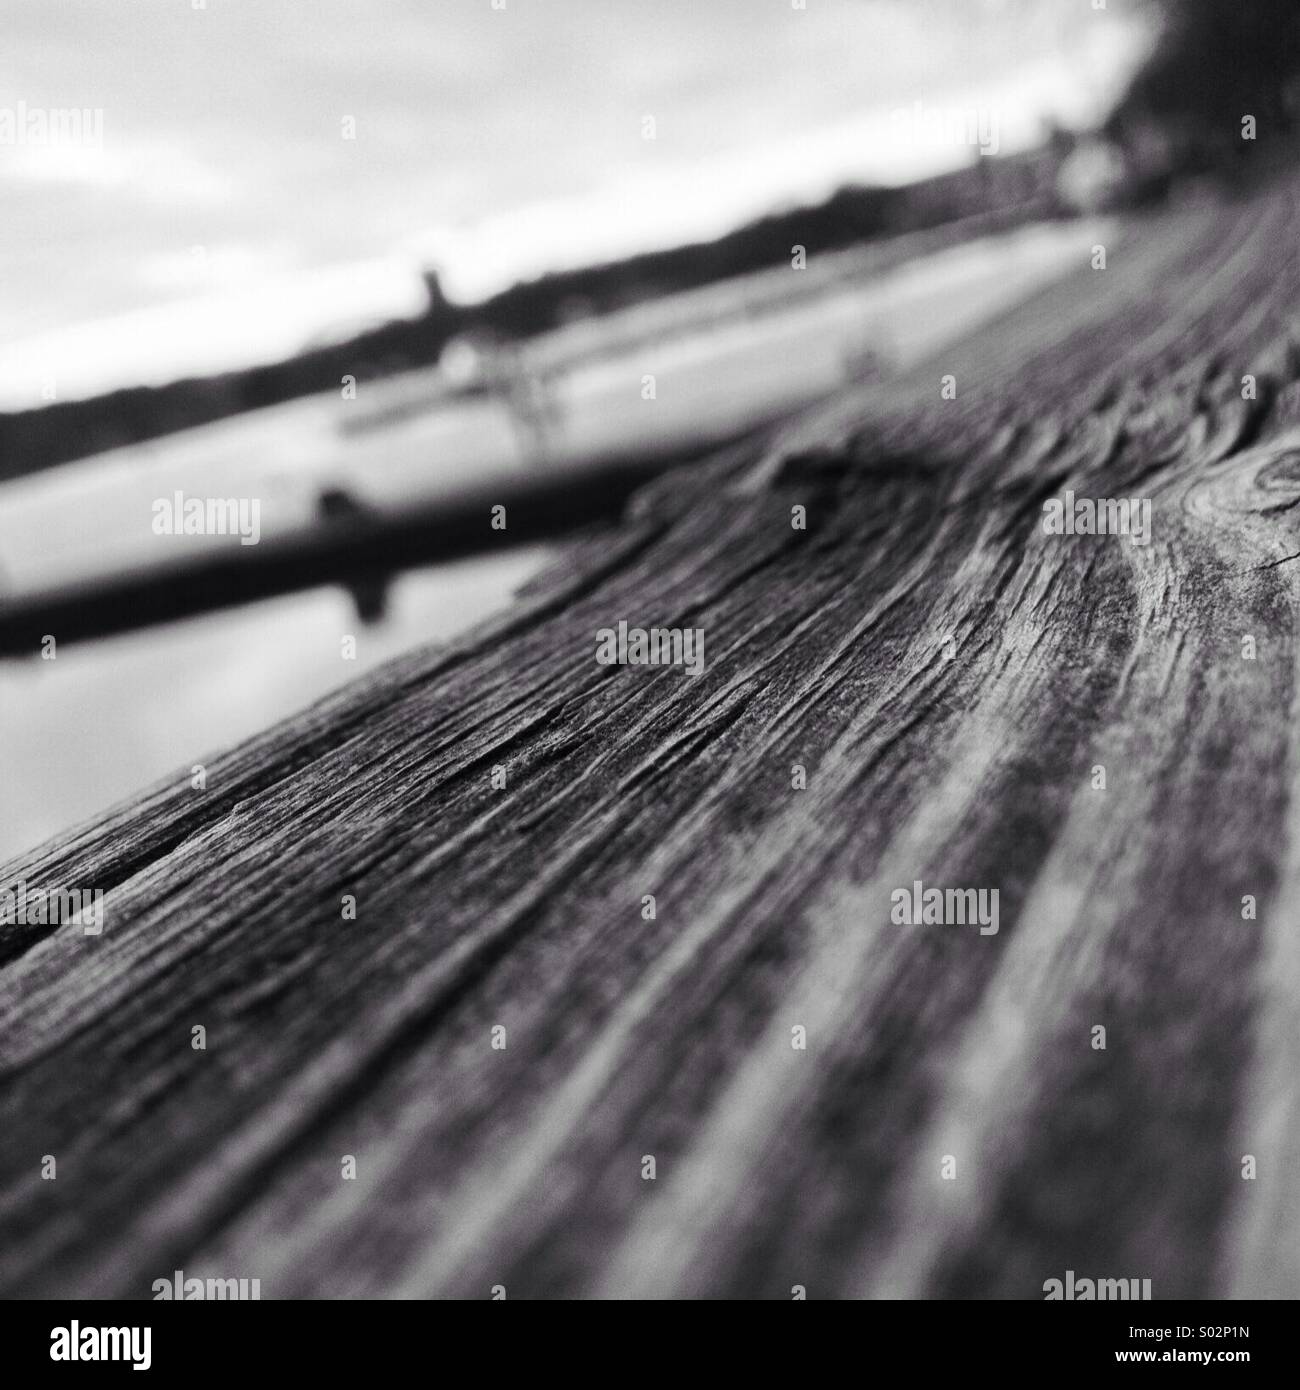 Grain on a plank of wood Stock Photo